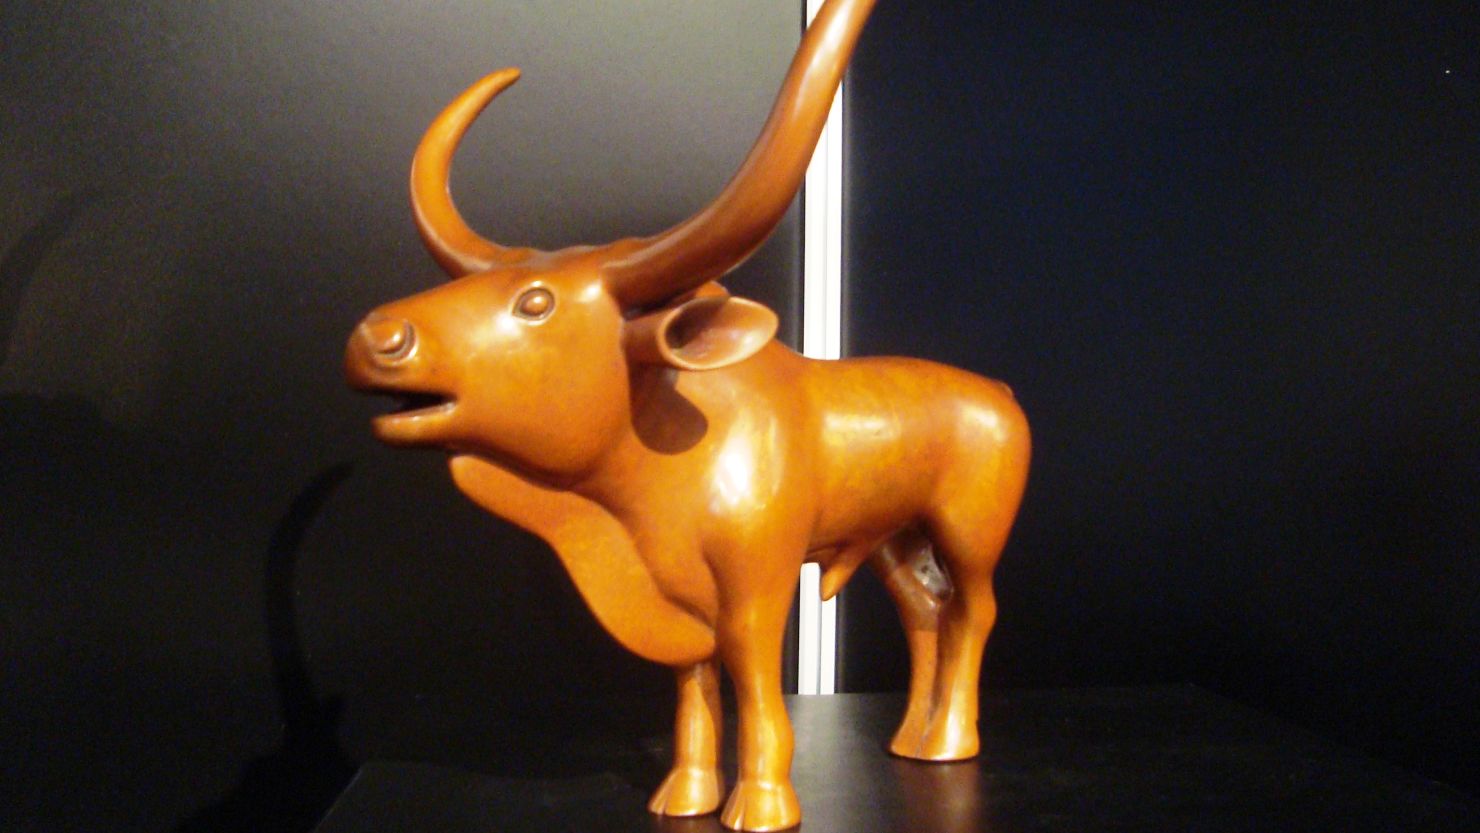 A bronze yak that was a gift from Chinese leader Mao Zedong in the 1970s has a starting price of 300 euros.